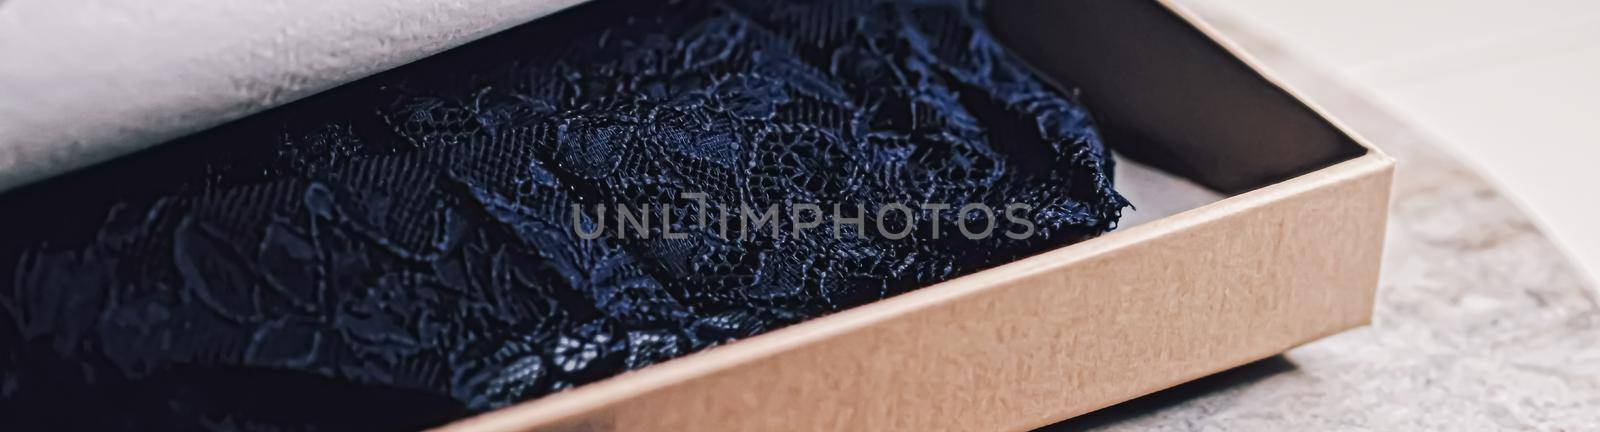 Lace garment inside elegant gift box as luxury purchase by Anneleven